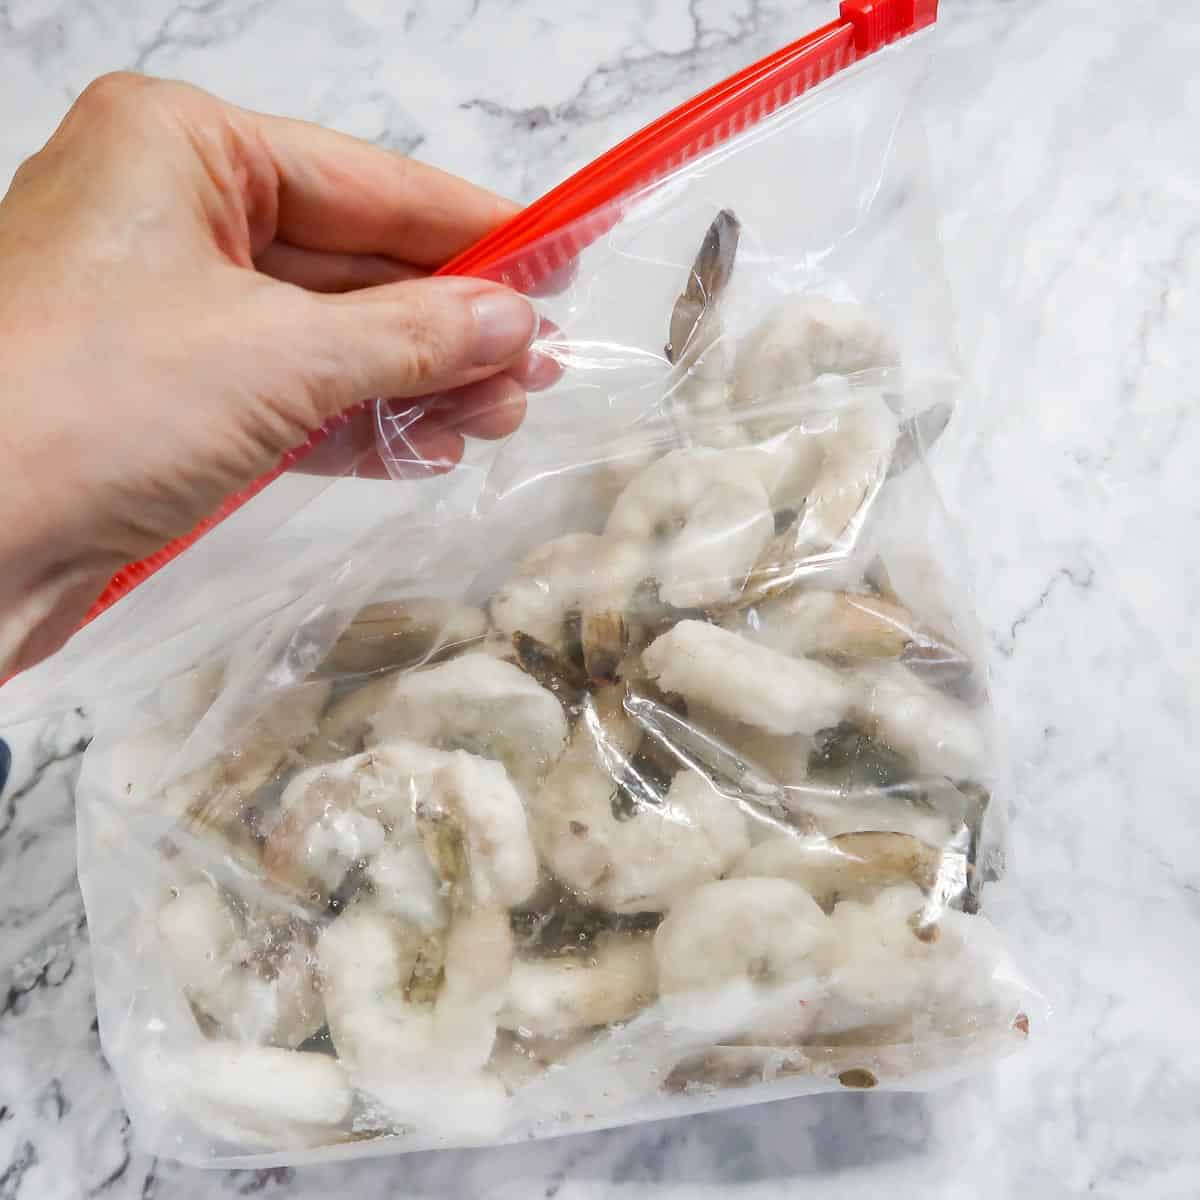 Overhead shot of a hand zipping up a clear ziplock bag full of frozen shrimp on a white marble surface.